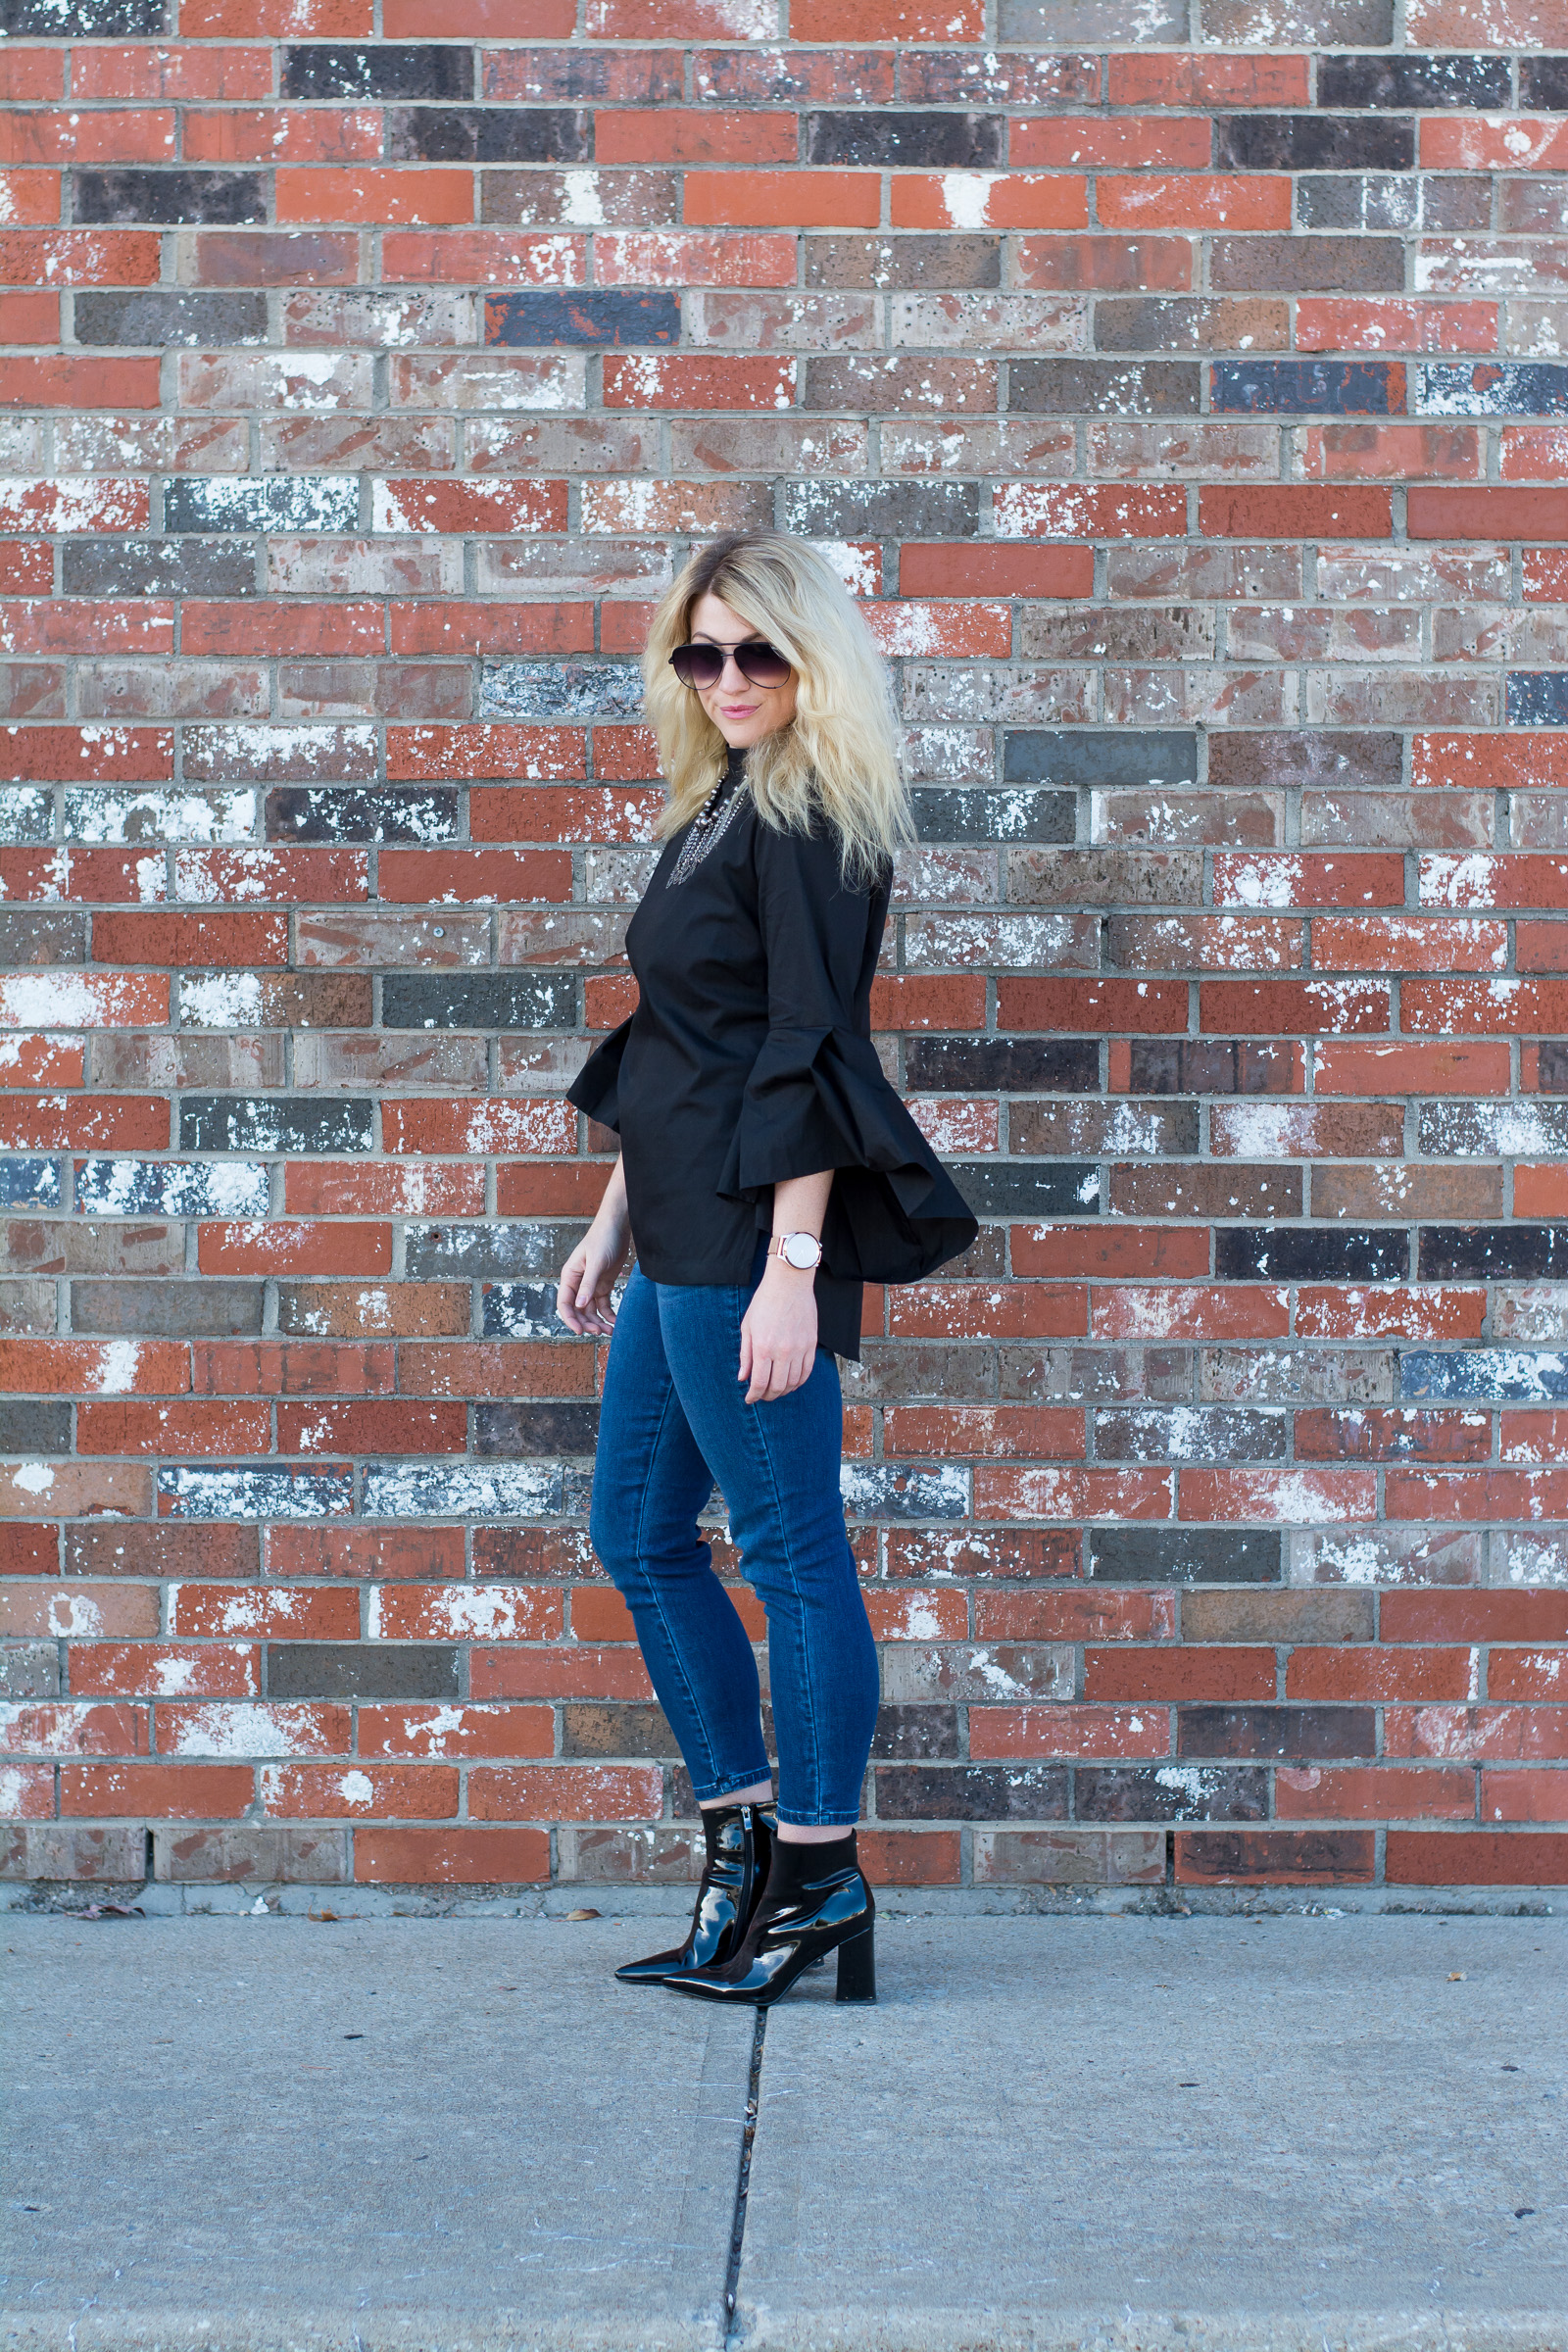 Black Bell Sleeves and Patent Leather Boots. | Ashley from LSR